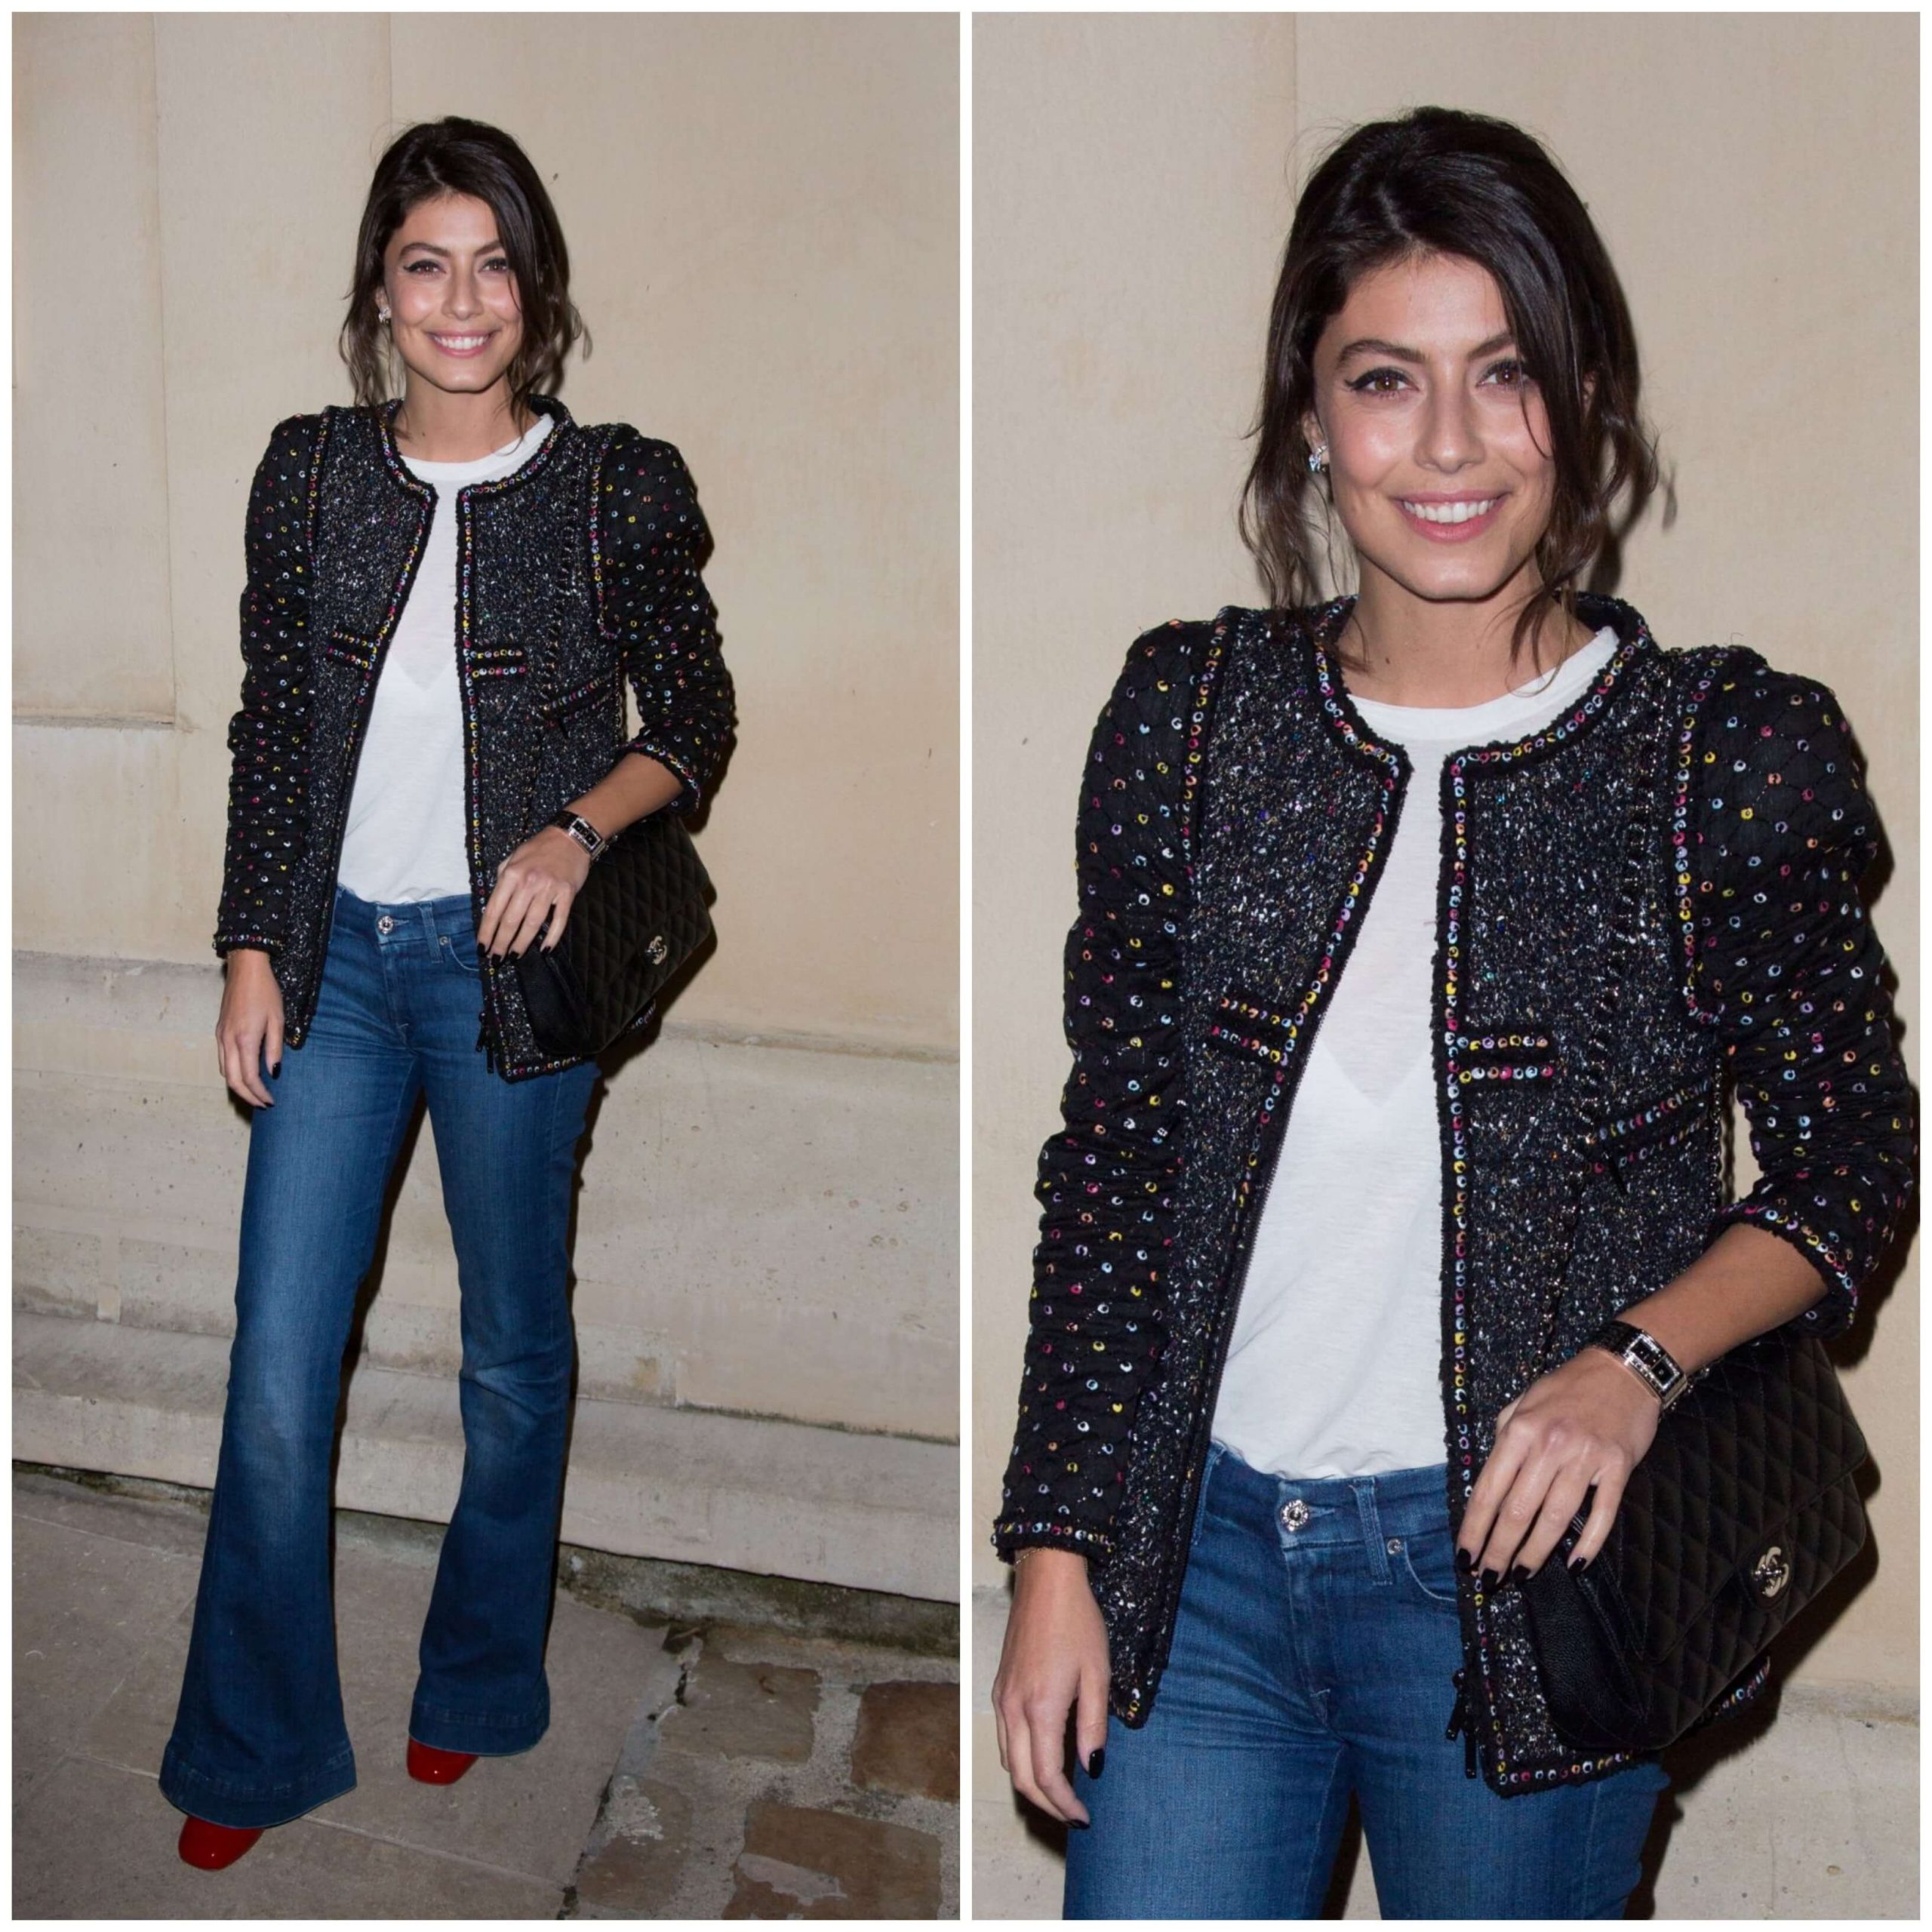 Alessandra Mastronardi – White Top & Blue Jeans With Printed Puffy Sleeves Shrug -  Chanel “Code Coco” Watch Launch Party in Paris